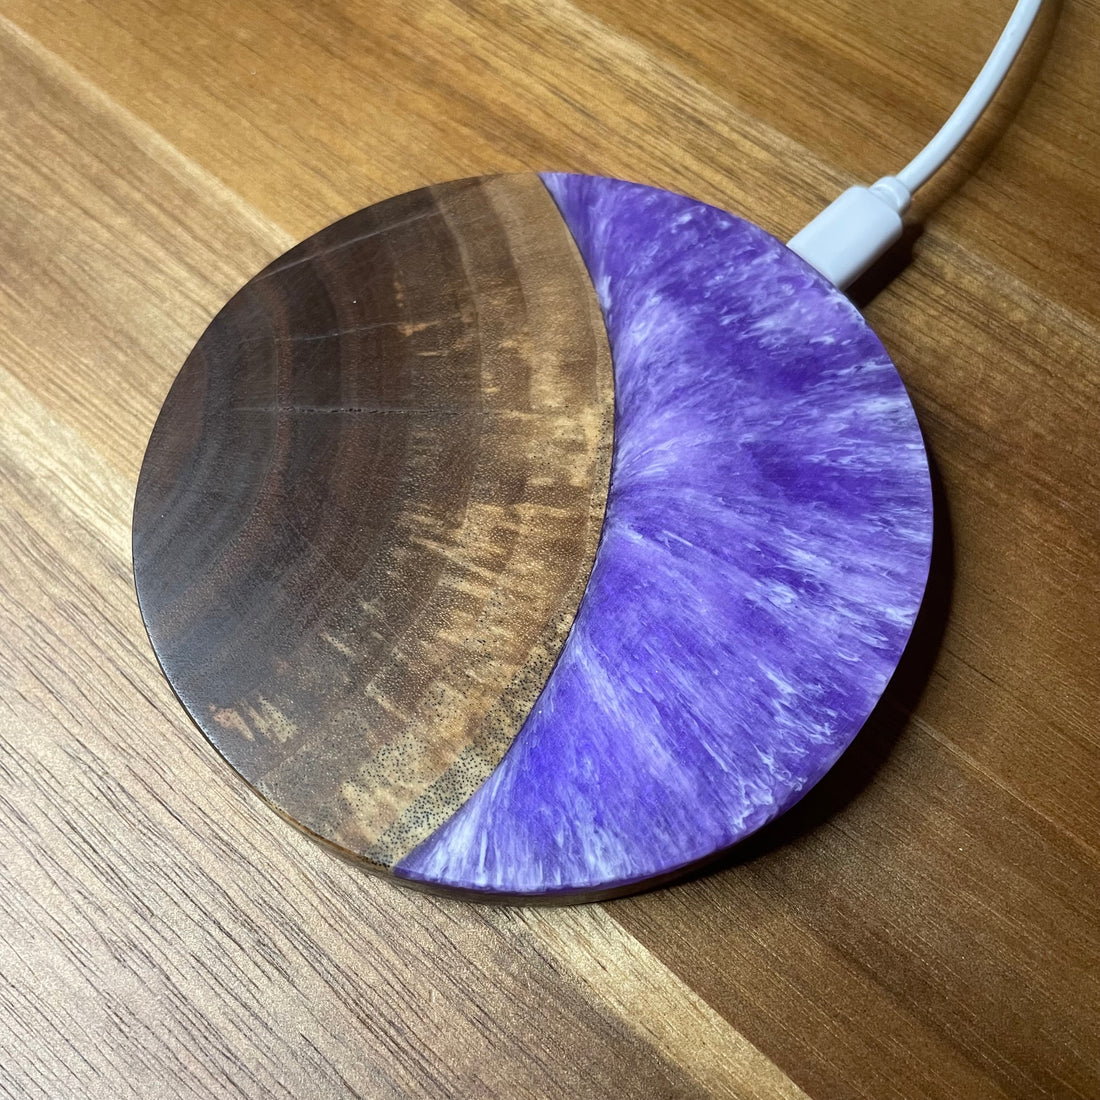 15W Qi Wireless Phone Charger.&nbsp;Made of walnut wood with purple and white swirled resin. Size: 3.875"Diameter x .5"D Comes with a 3' Type C Micro to USB cord.